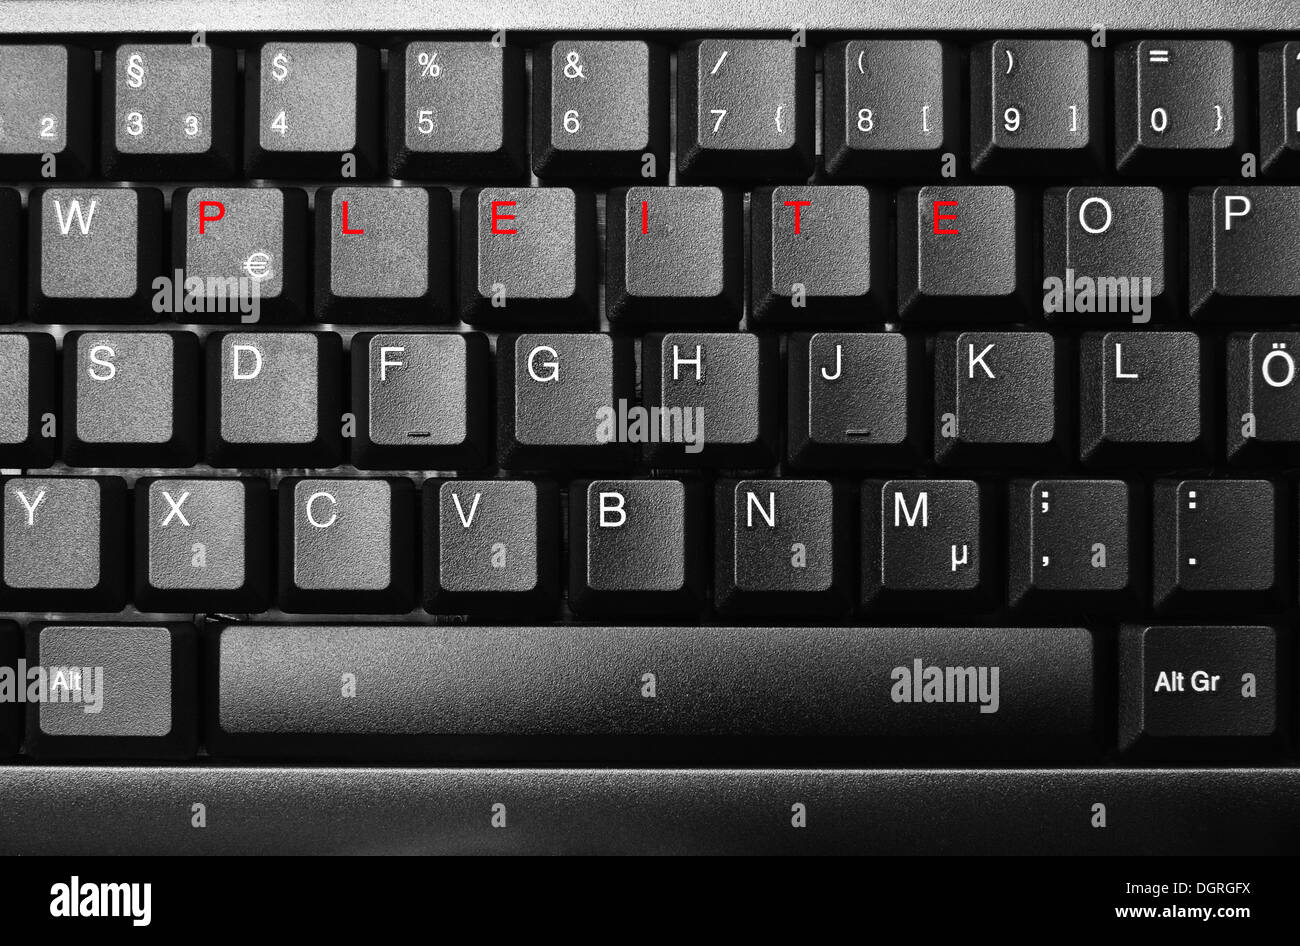 Keyboard with lettering 'Pleite', bankrupcy in red Stock Photo